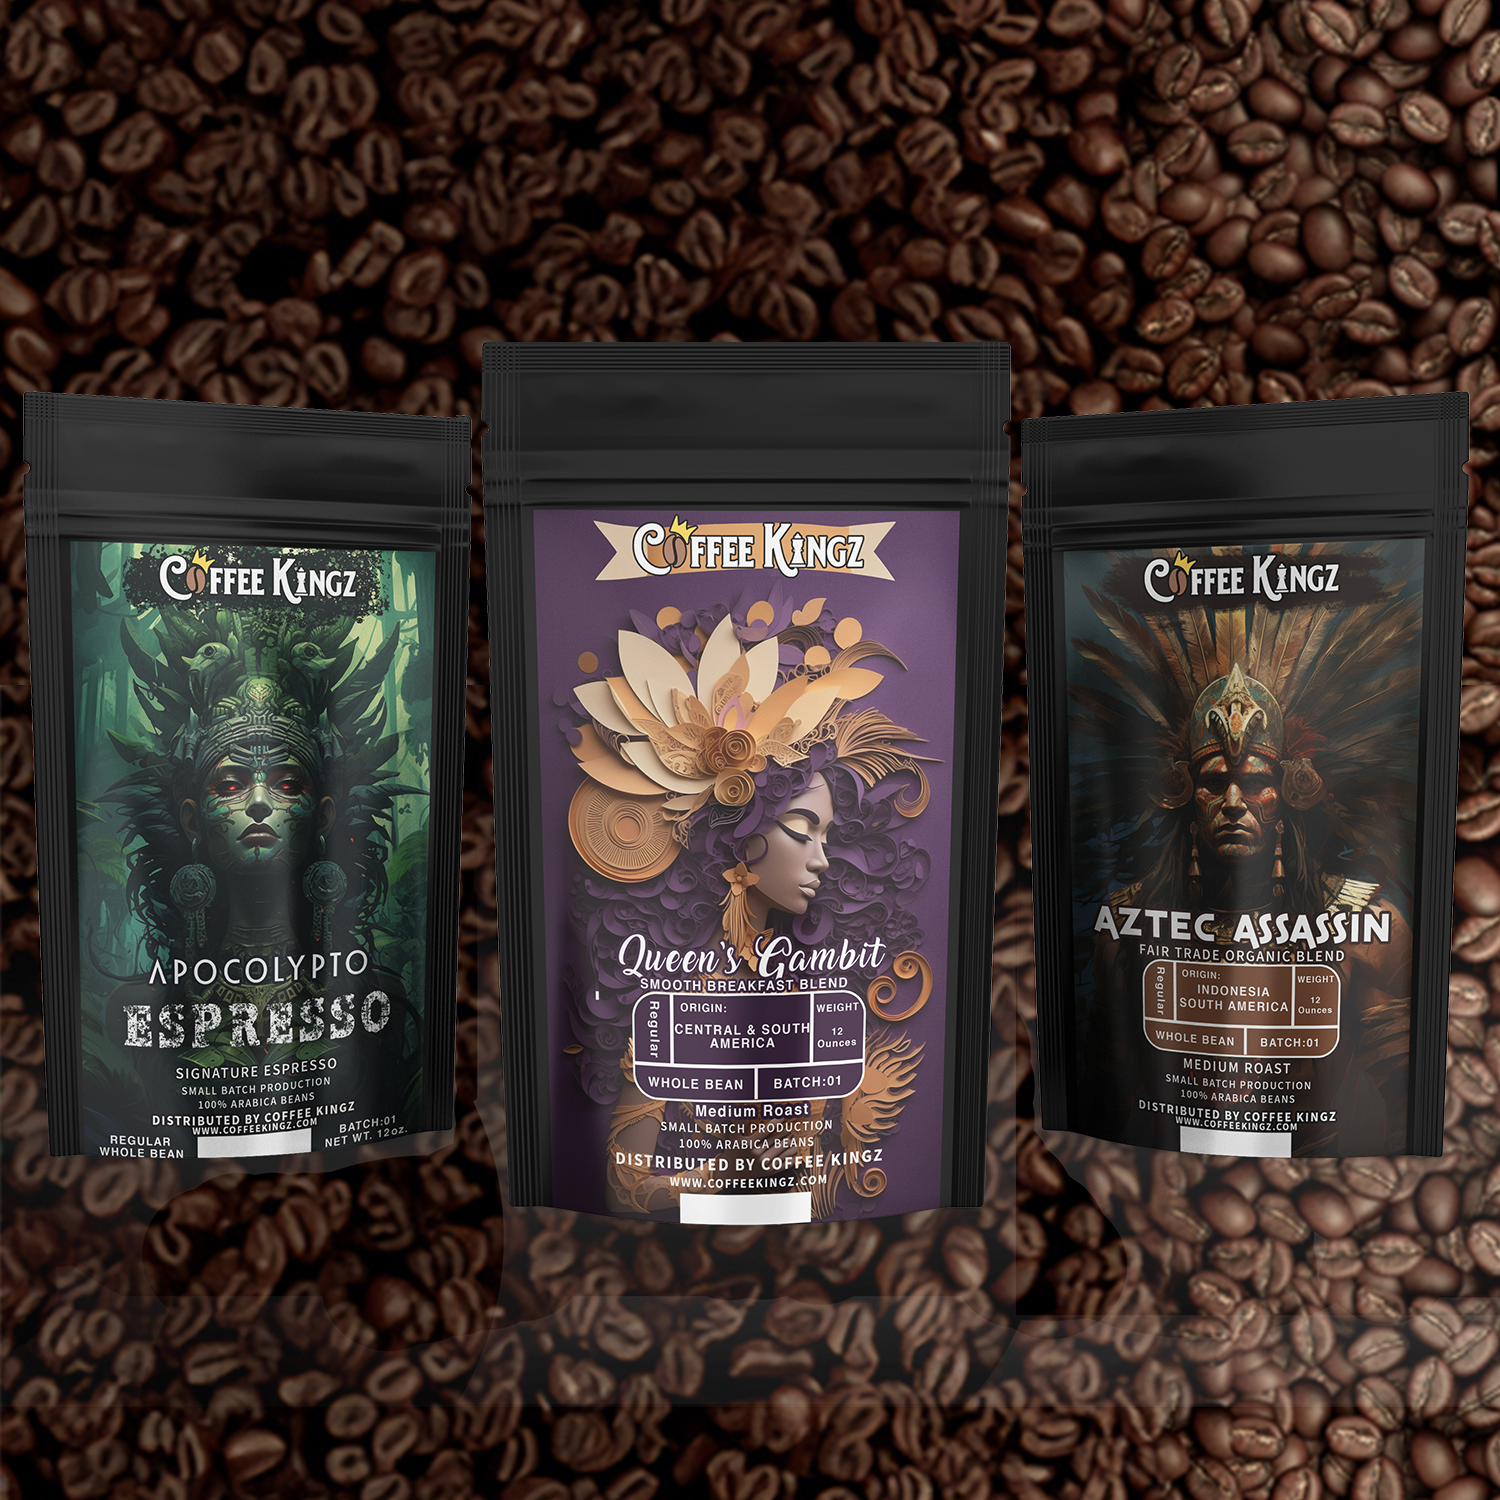 Three bags of "coffee kingz" brand coffee with unique artistic labels, featuring "apocalypto espresso," "queen's gambit blend," and "aztec assassin," set against a background of scattered coffee beans.